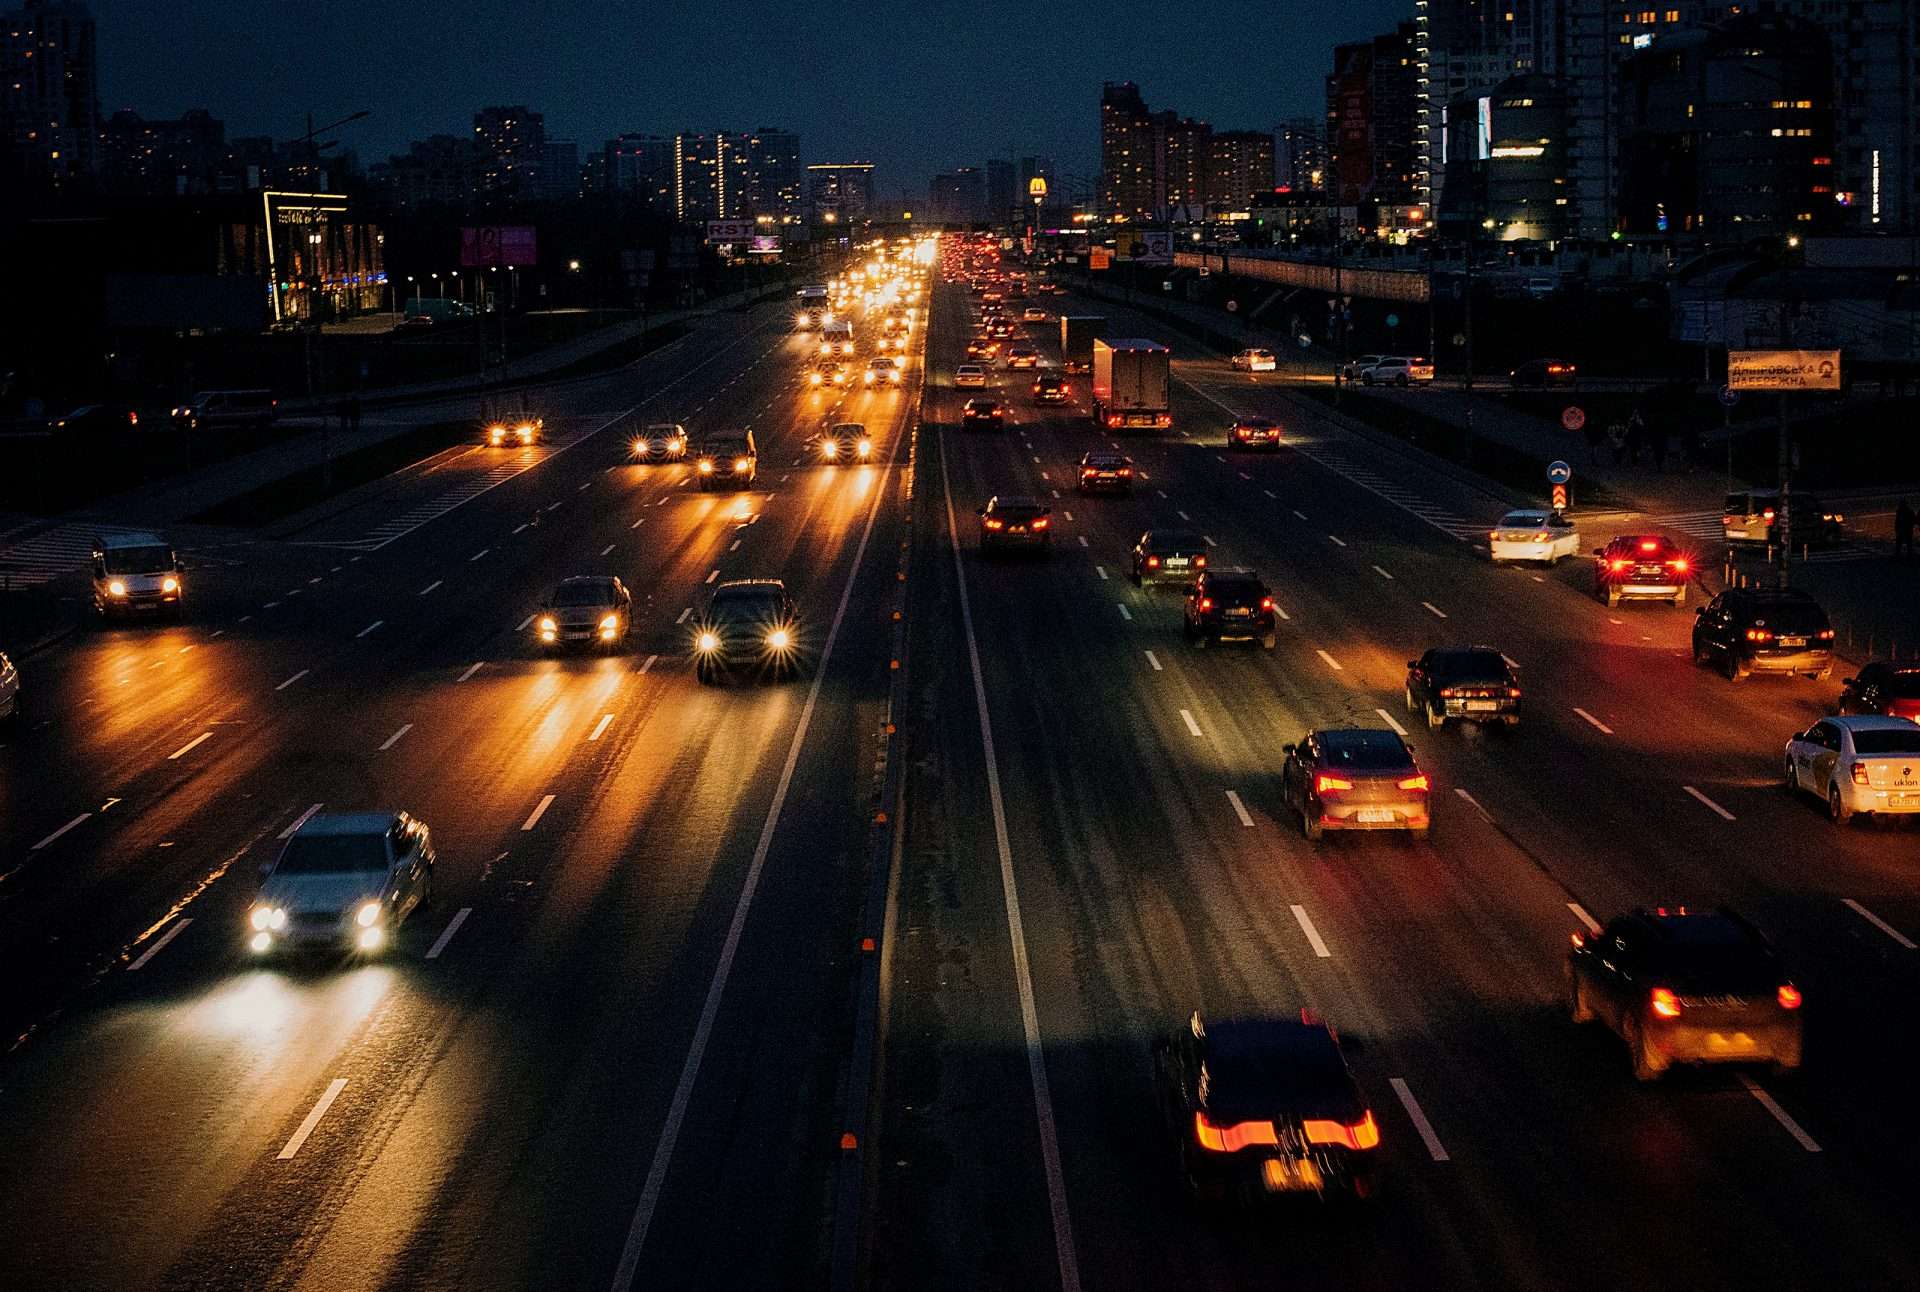 Busy highway at night with bright headlights